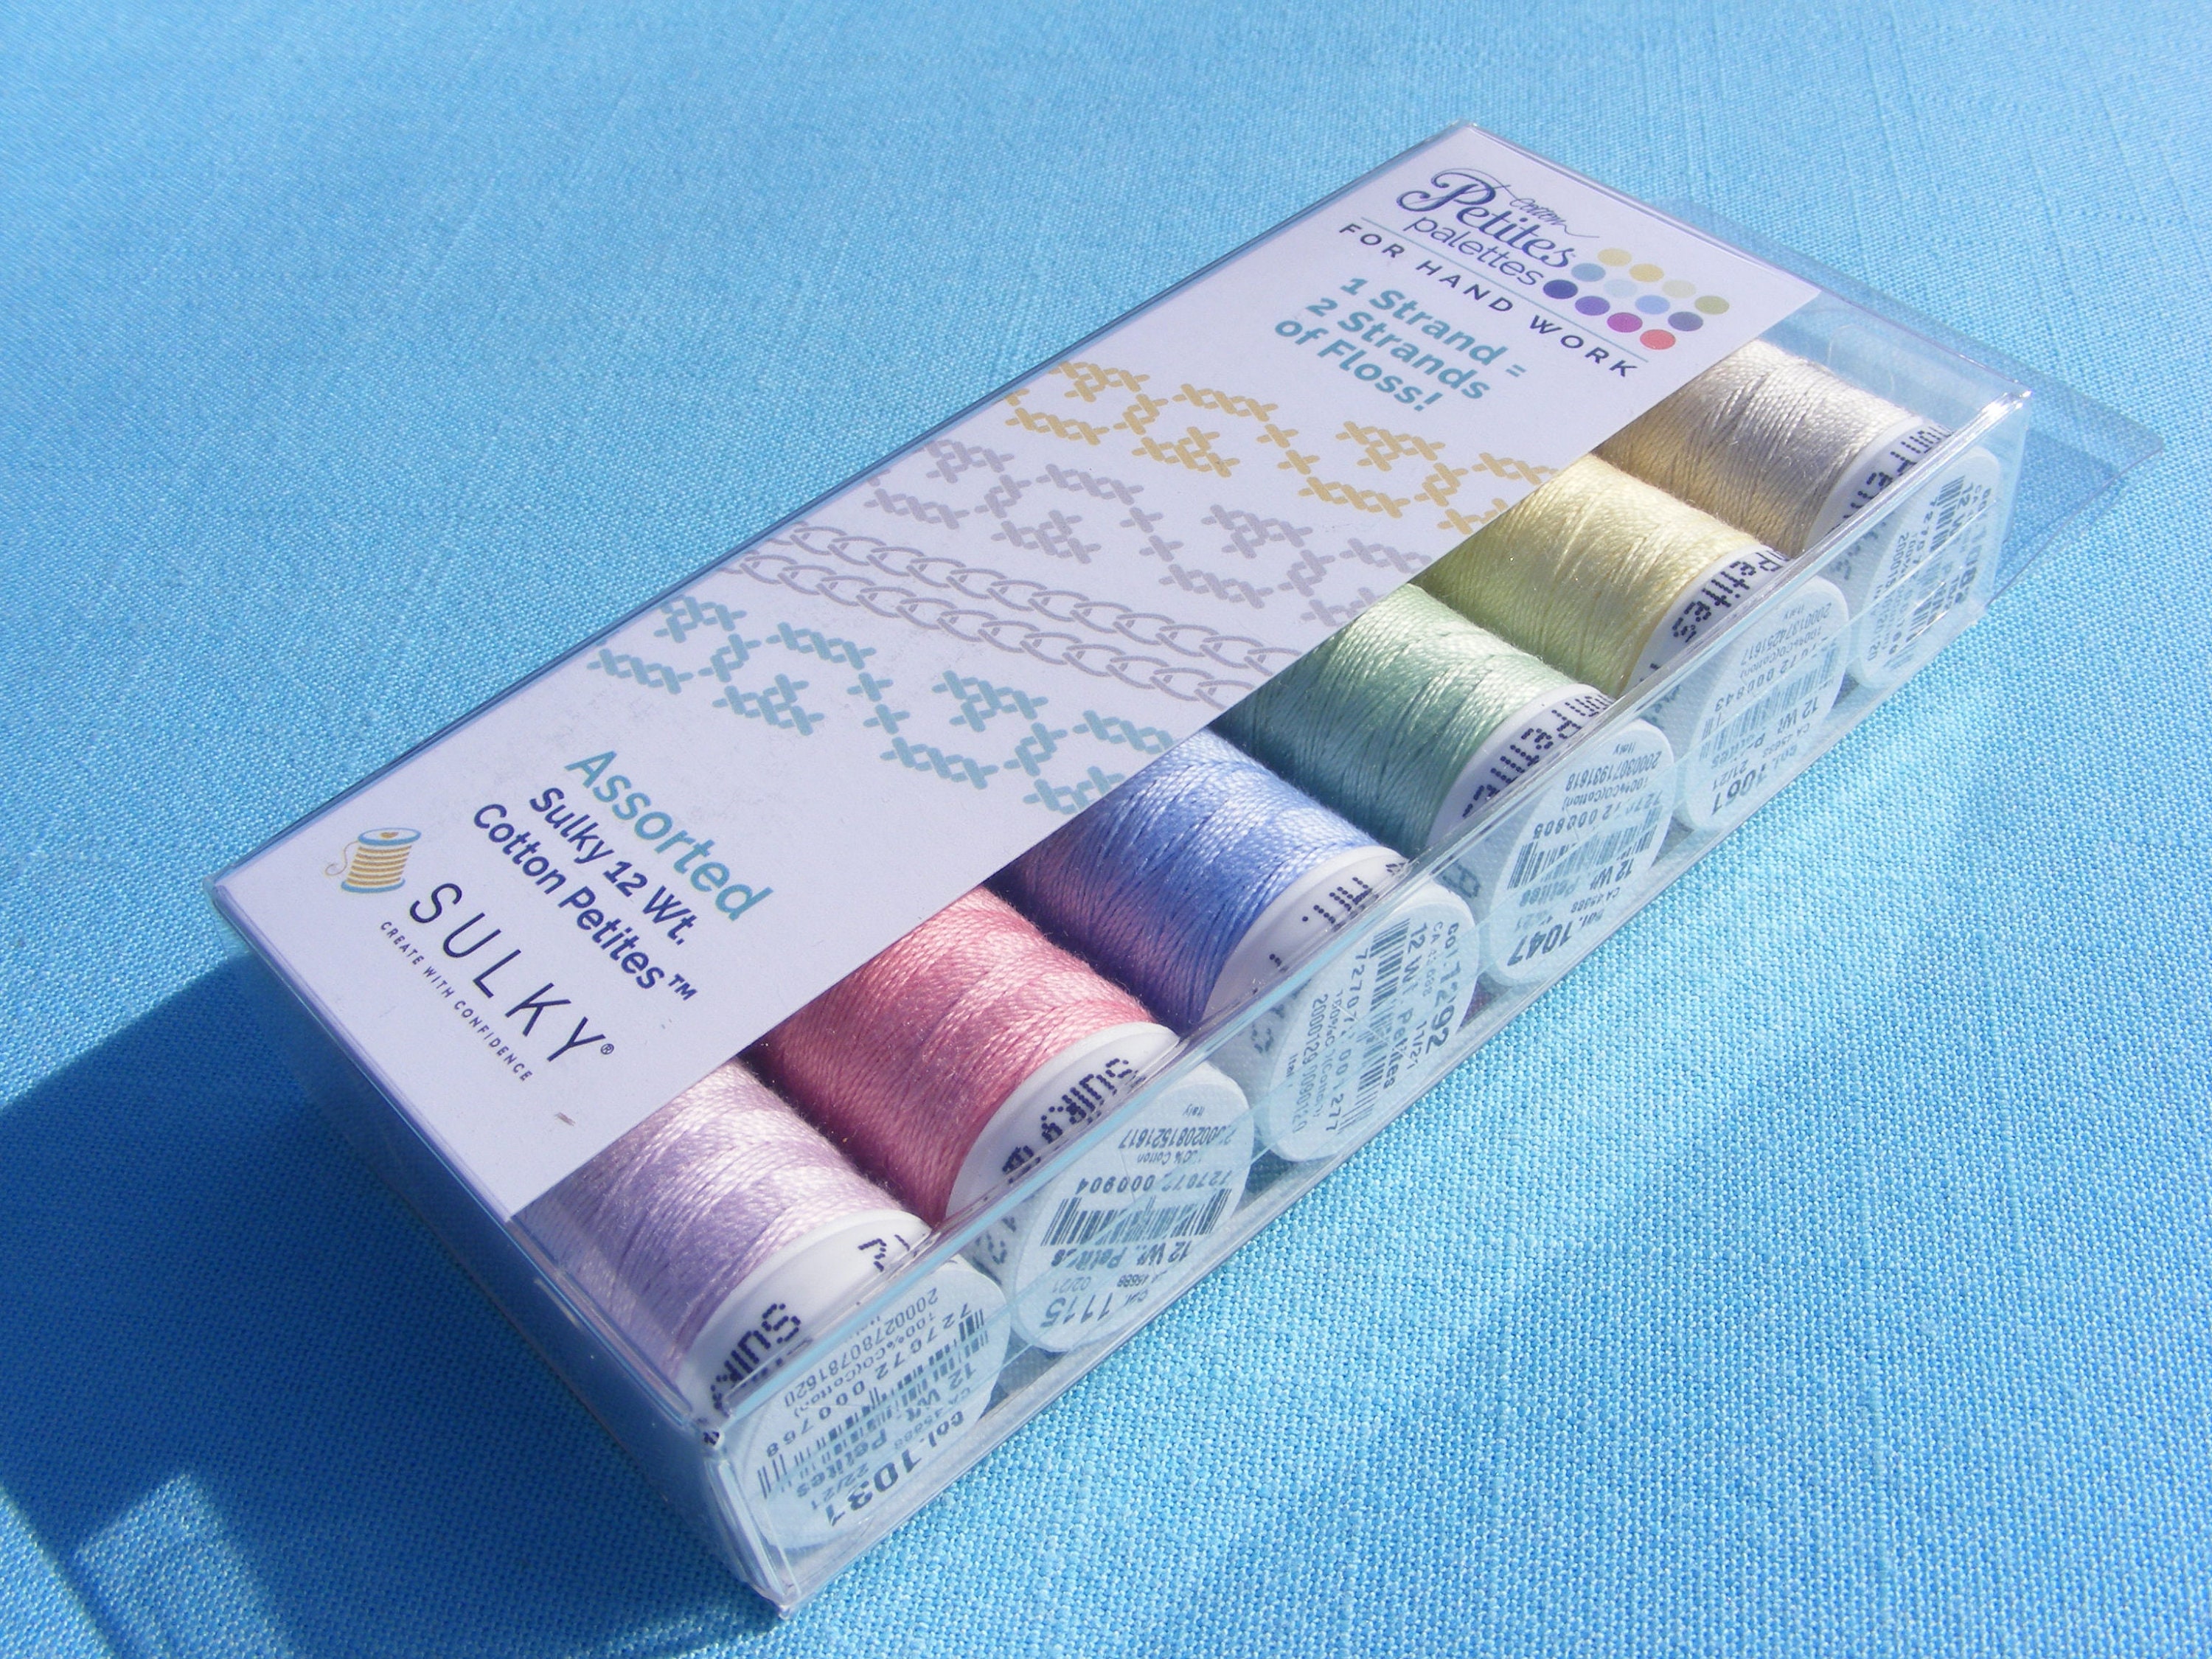 Spool Rack for Sulky Embroidery Floss With Needle Minder, Embroidery Thread  Holder, Floss Organizer, Thread Rack 